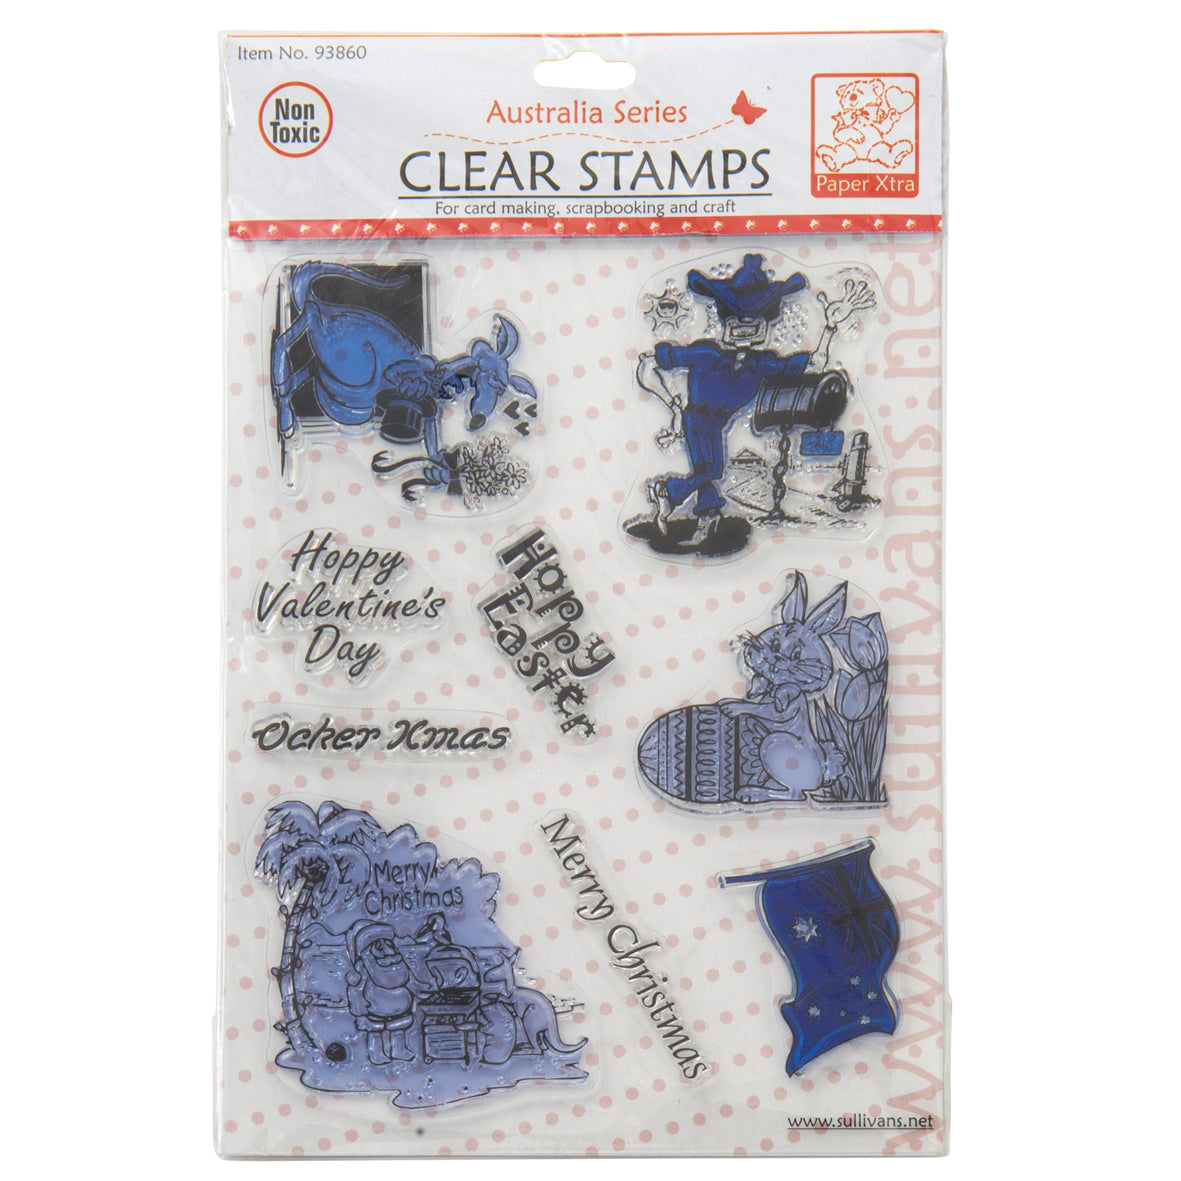 Embosser Stamp Polymer Clay Australiana Stamps Embossing Native